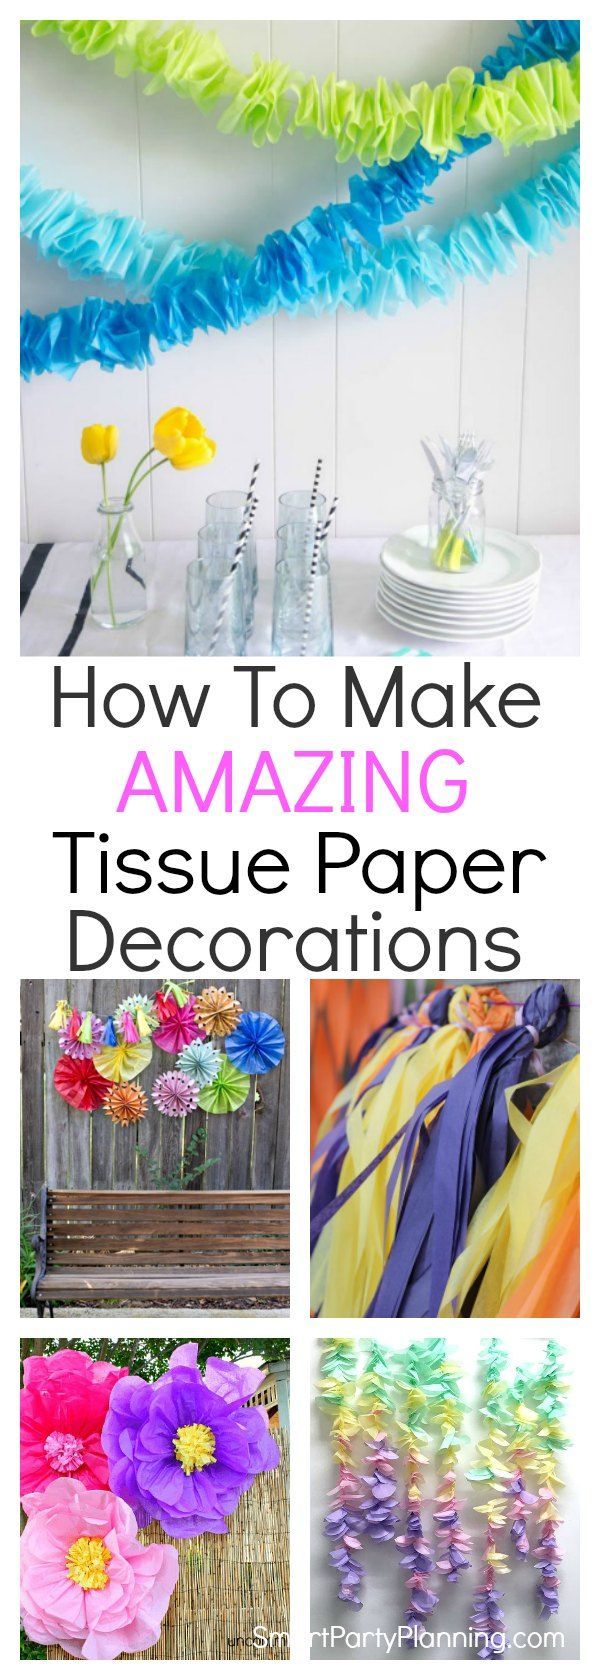 How To Make Amazing Tissue Paper Decorations - How To Make Amazing Tissue Paper Decorations -   16 diy Paper pom poms ideas